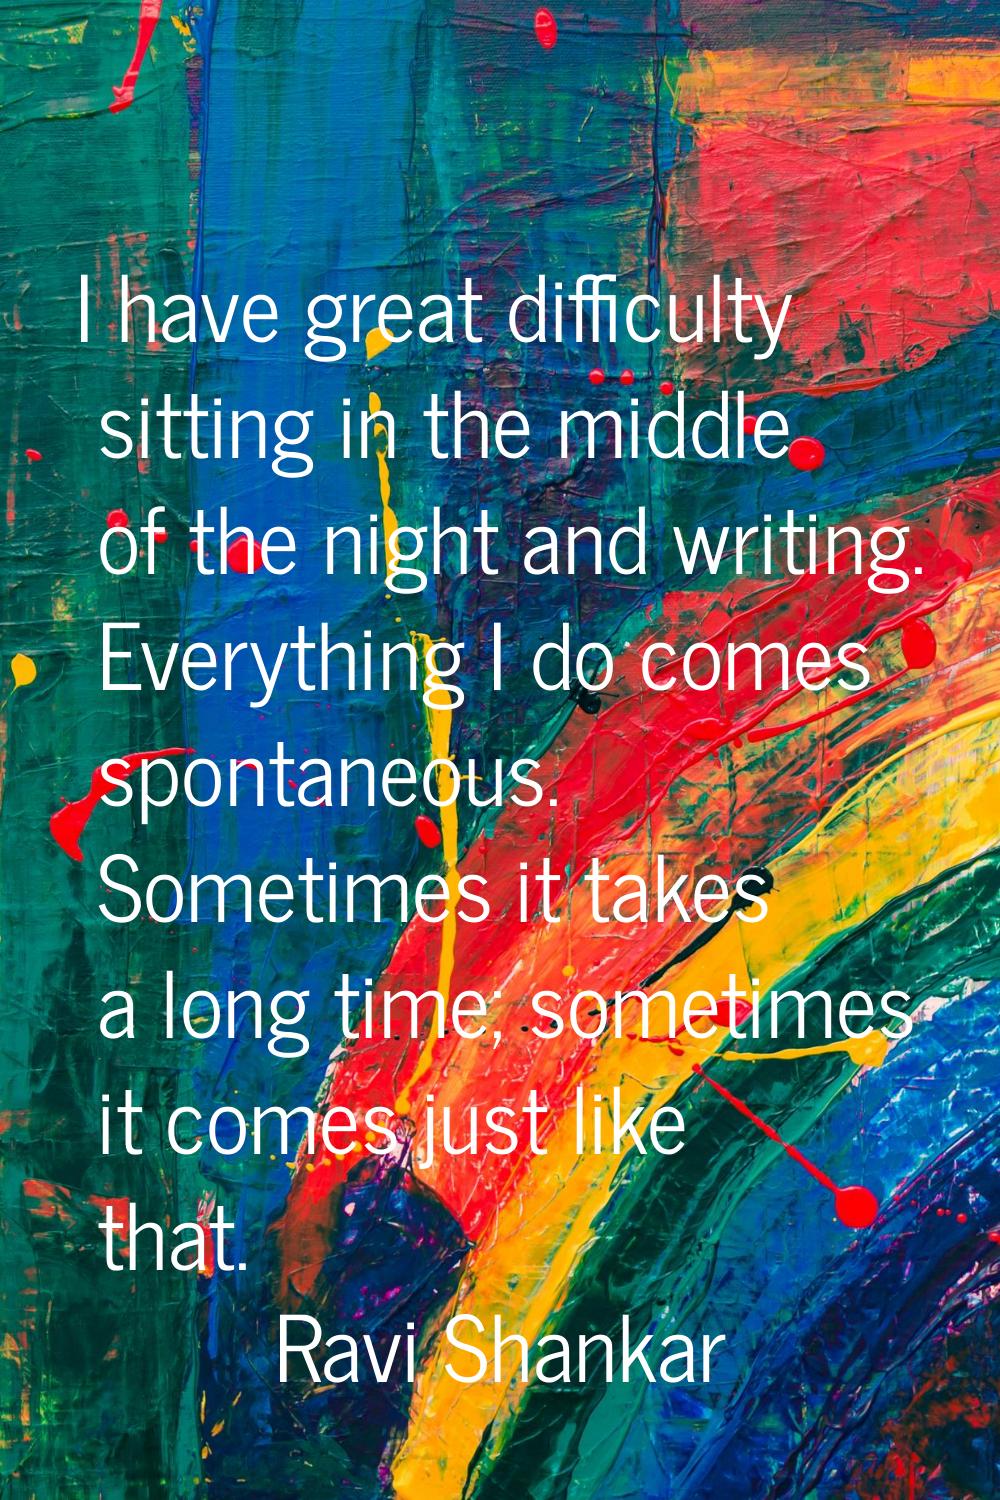 I have great difficulty sitting in the middle of the night and writing. Everything I do comes spont